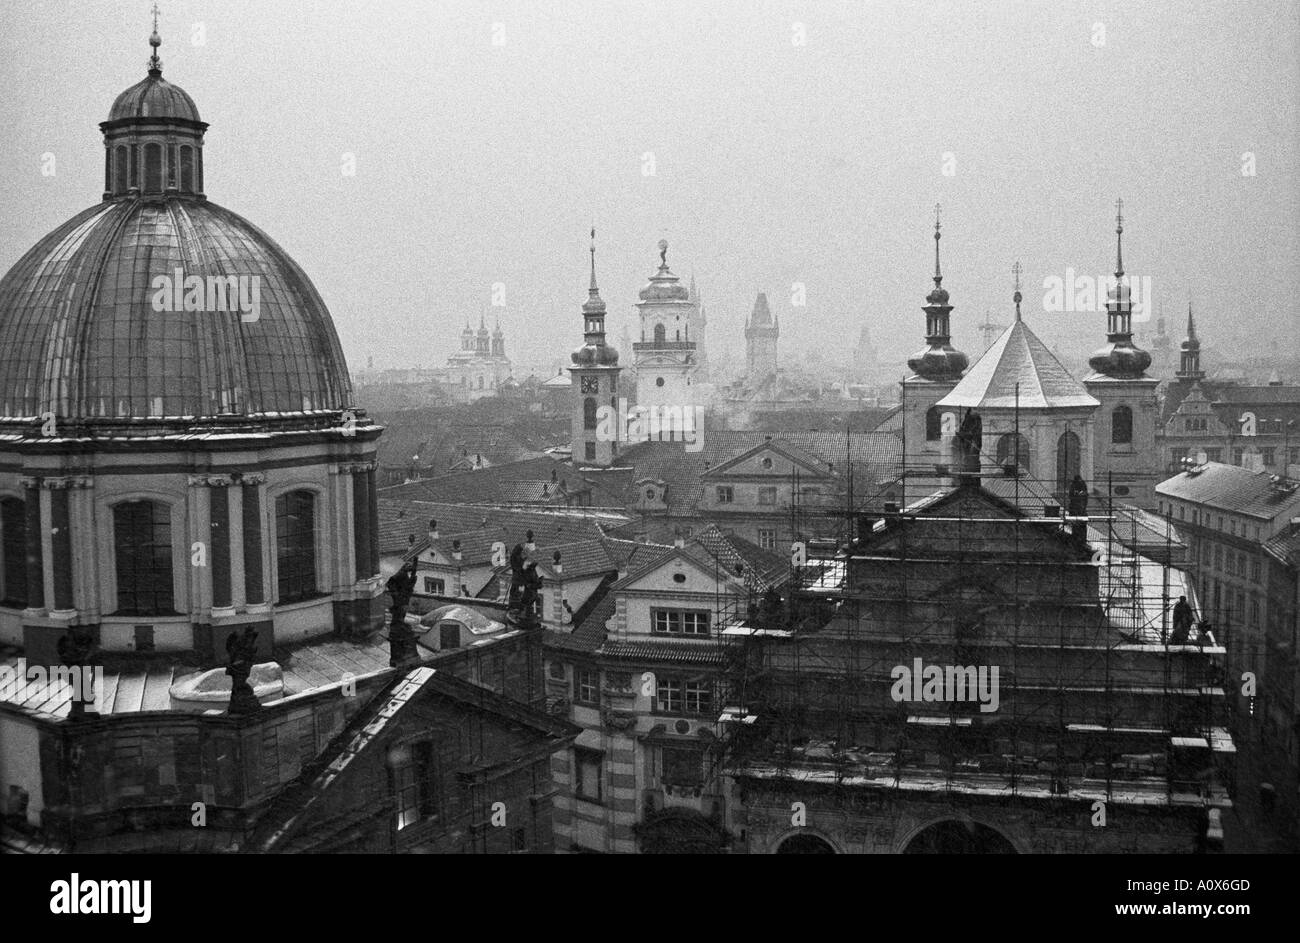 CZECH REPUBLIC PRAGUE City rooftops of old town in winter rain Stock Photo